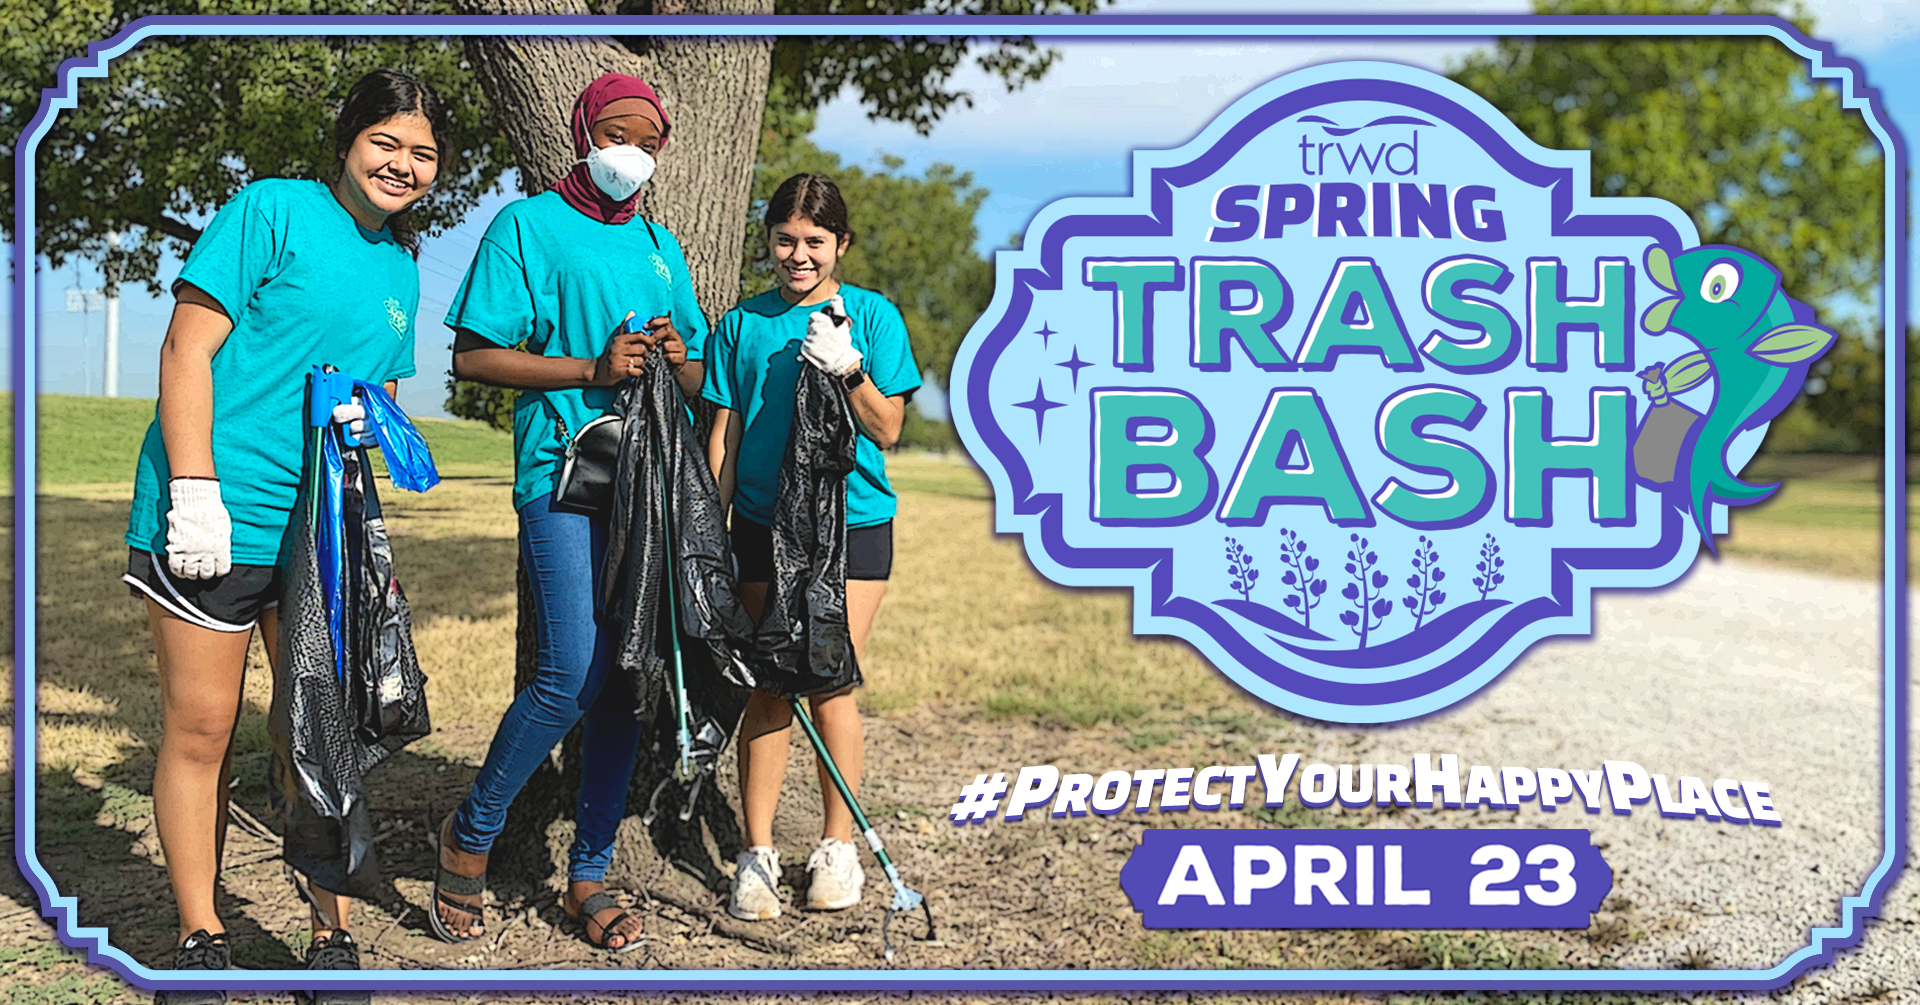 Protect your happy place with the TRWD Spring Trash Bash 2022